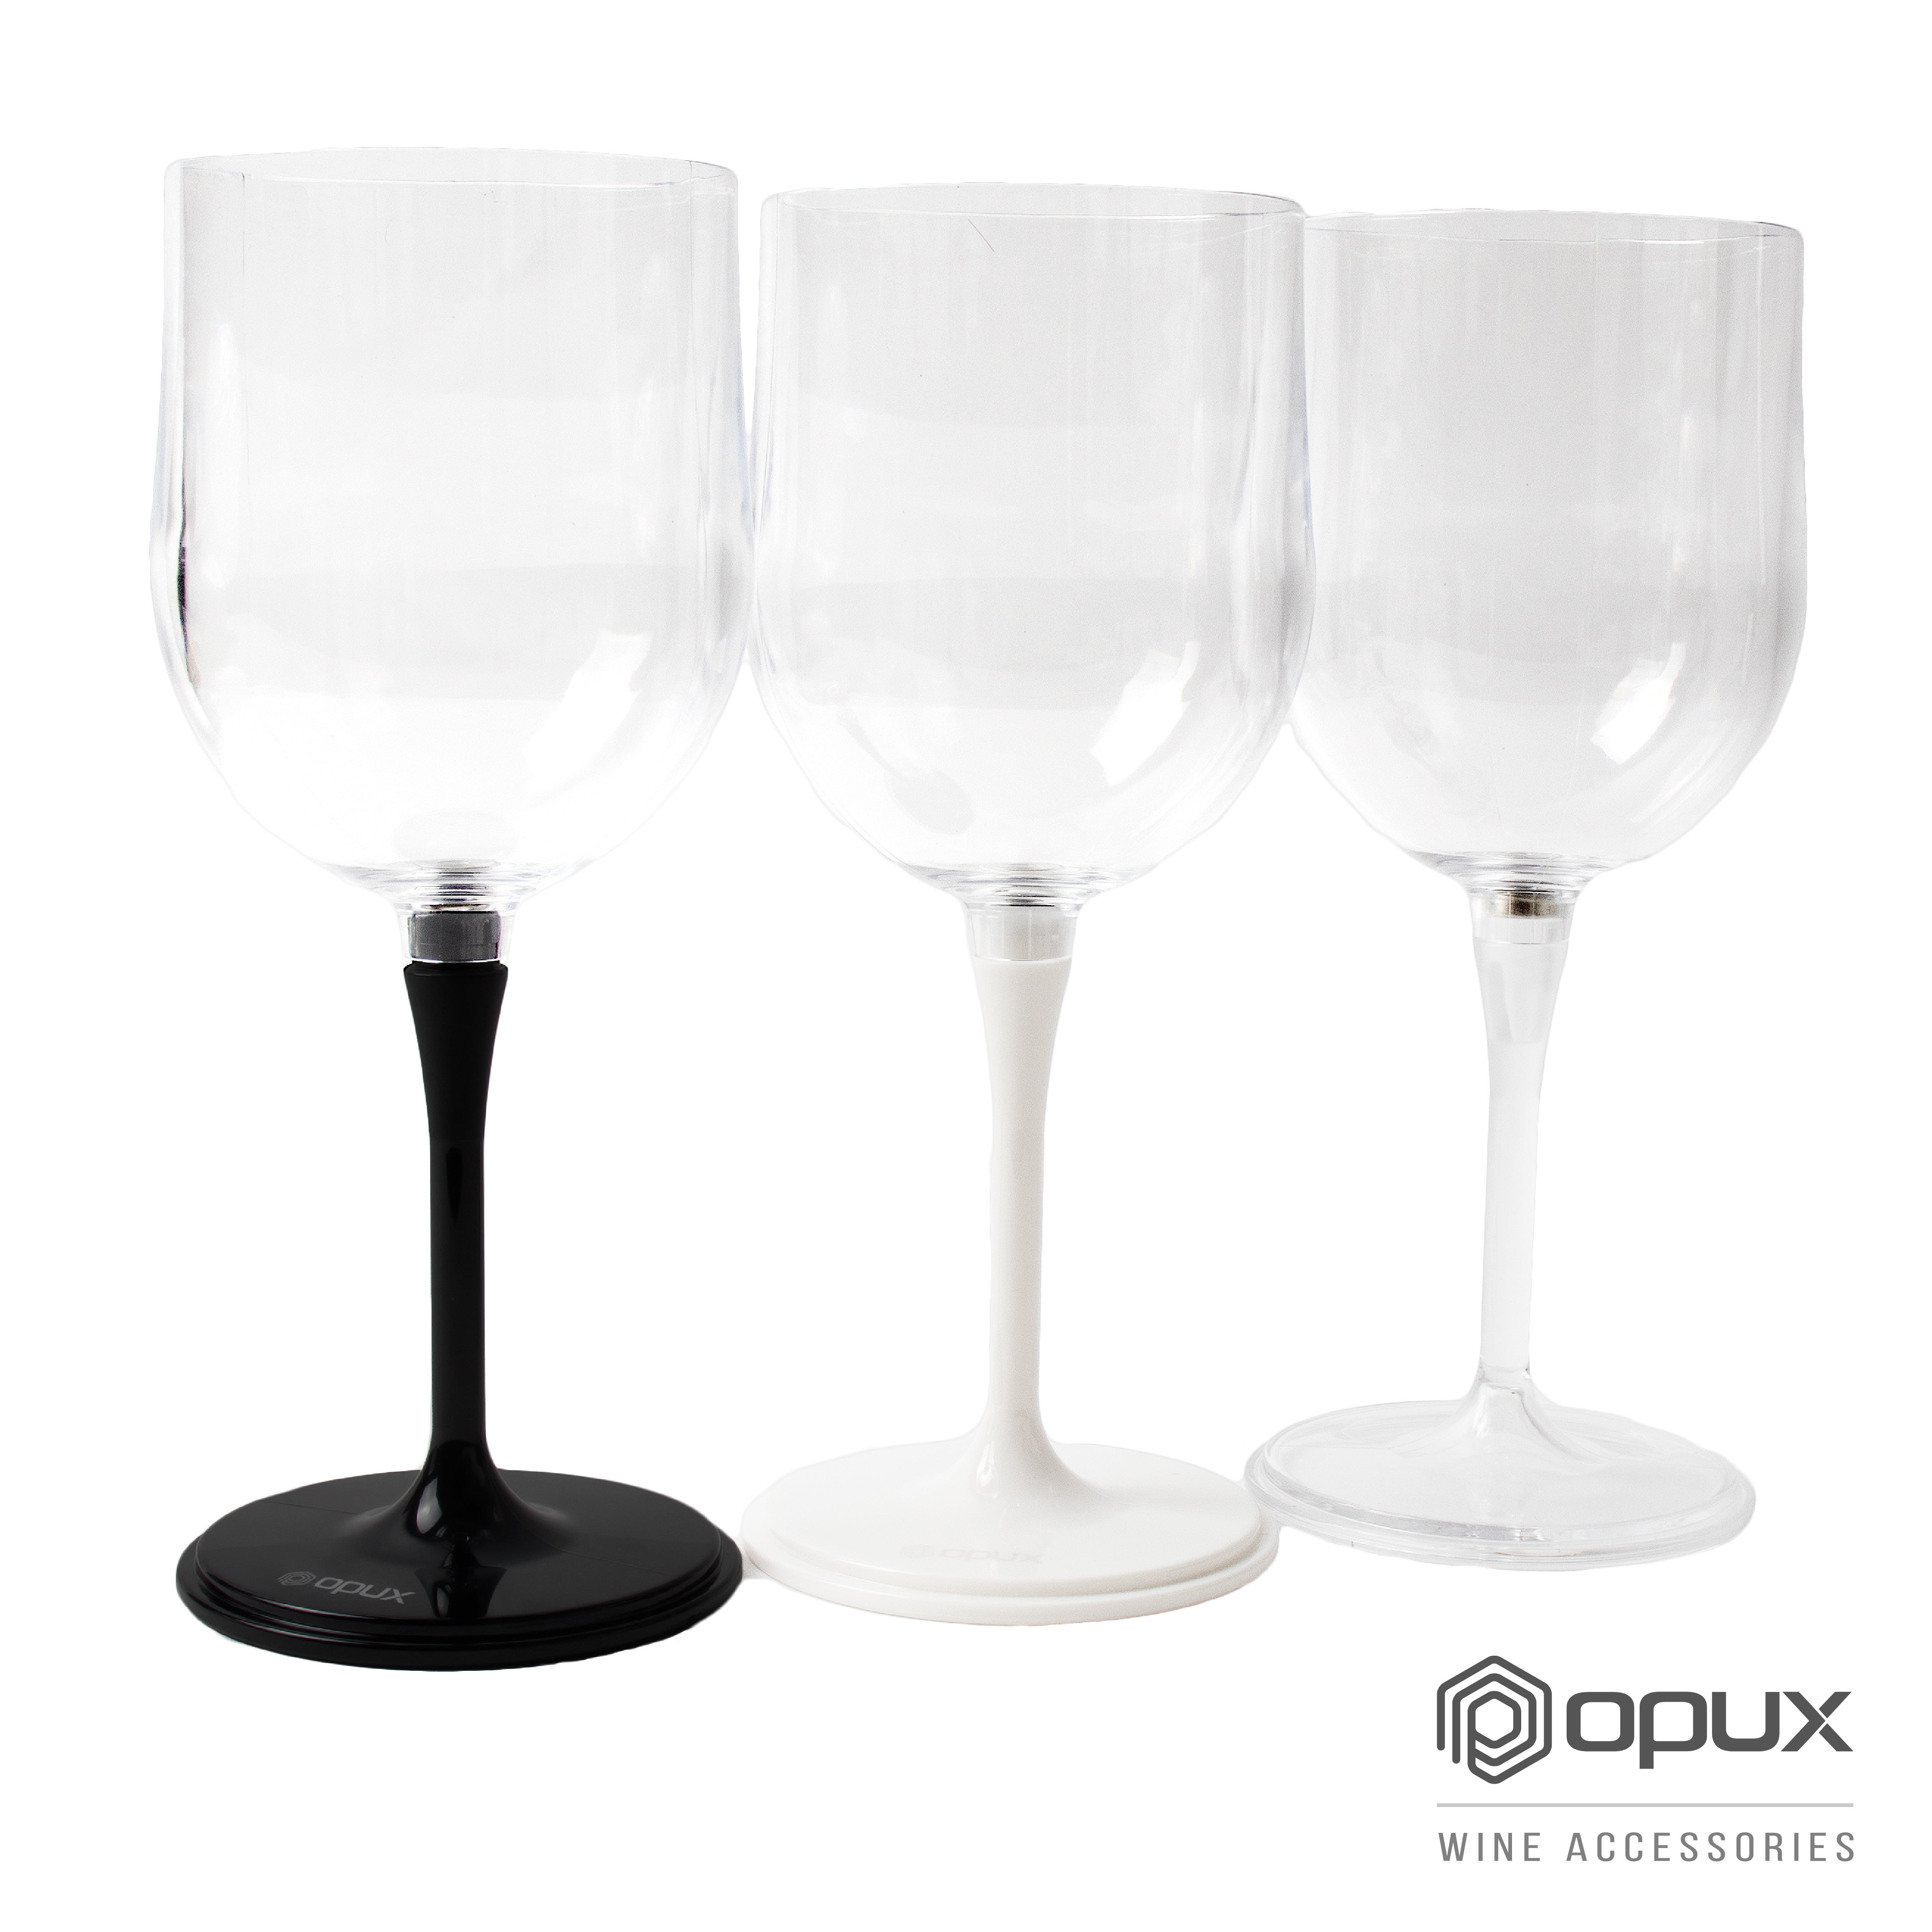  Transparent Portable Collapsible Wine Glass, Unbreakable,  Shatterproof Clear Plastic Wine Glass, BPA FREE, Dishwasher Safe,  Detachable Stem Wine Cup